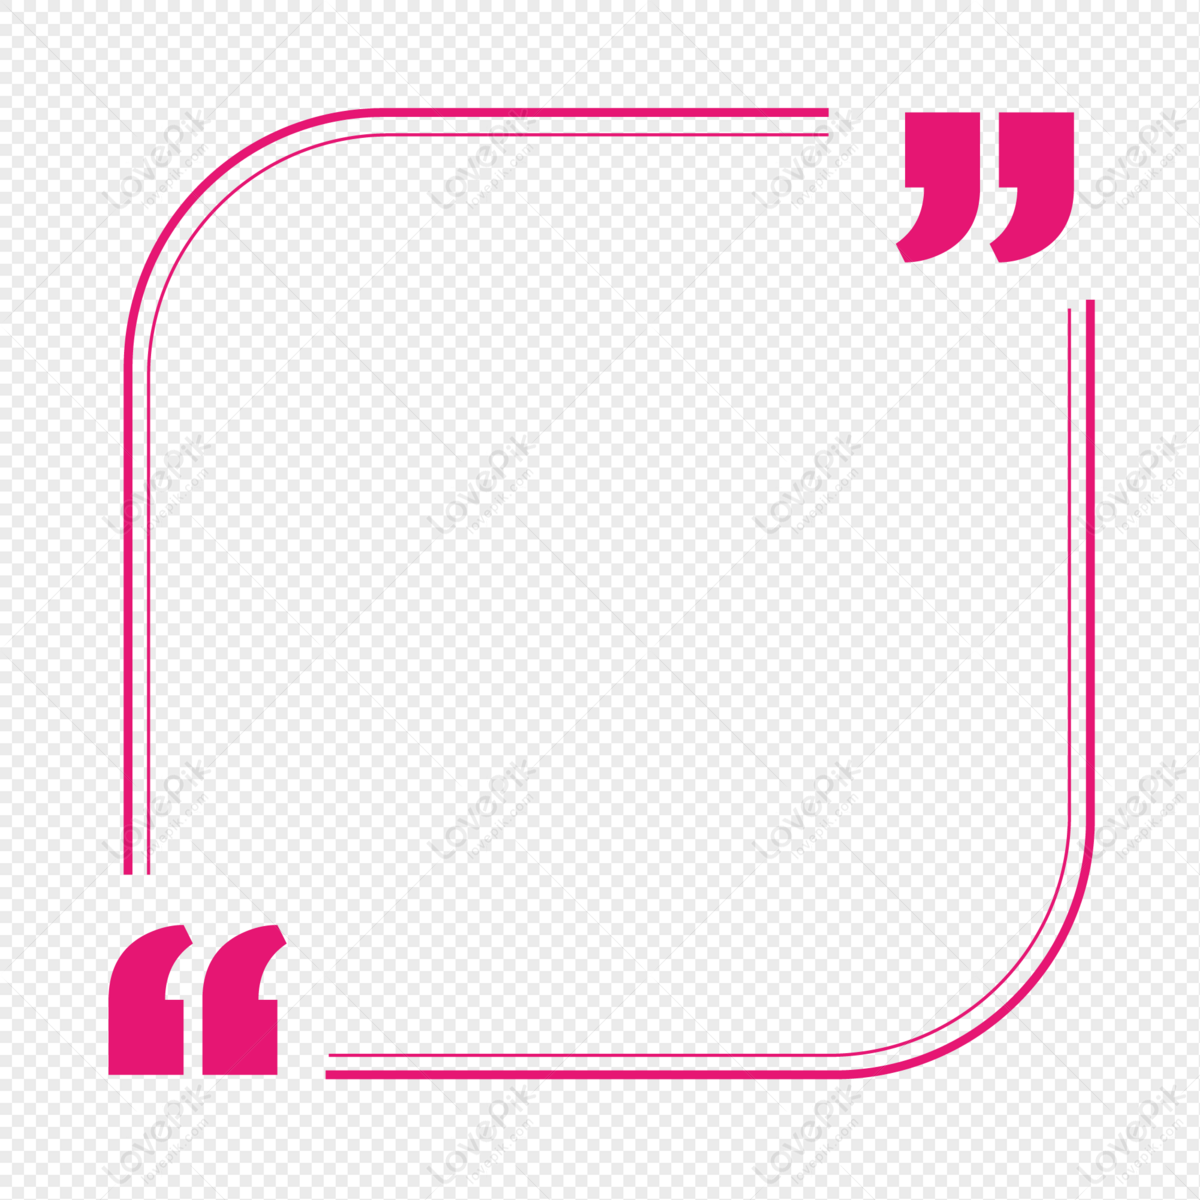 Square Quotes Border PNG Transparent And Clipart Image For Free Download -  Lovepik | 401186096